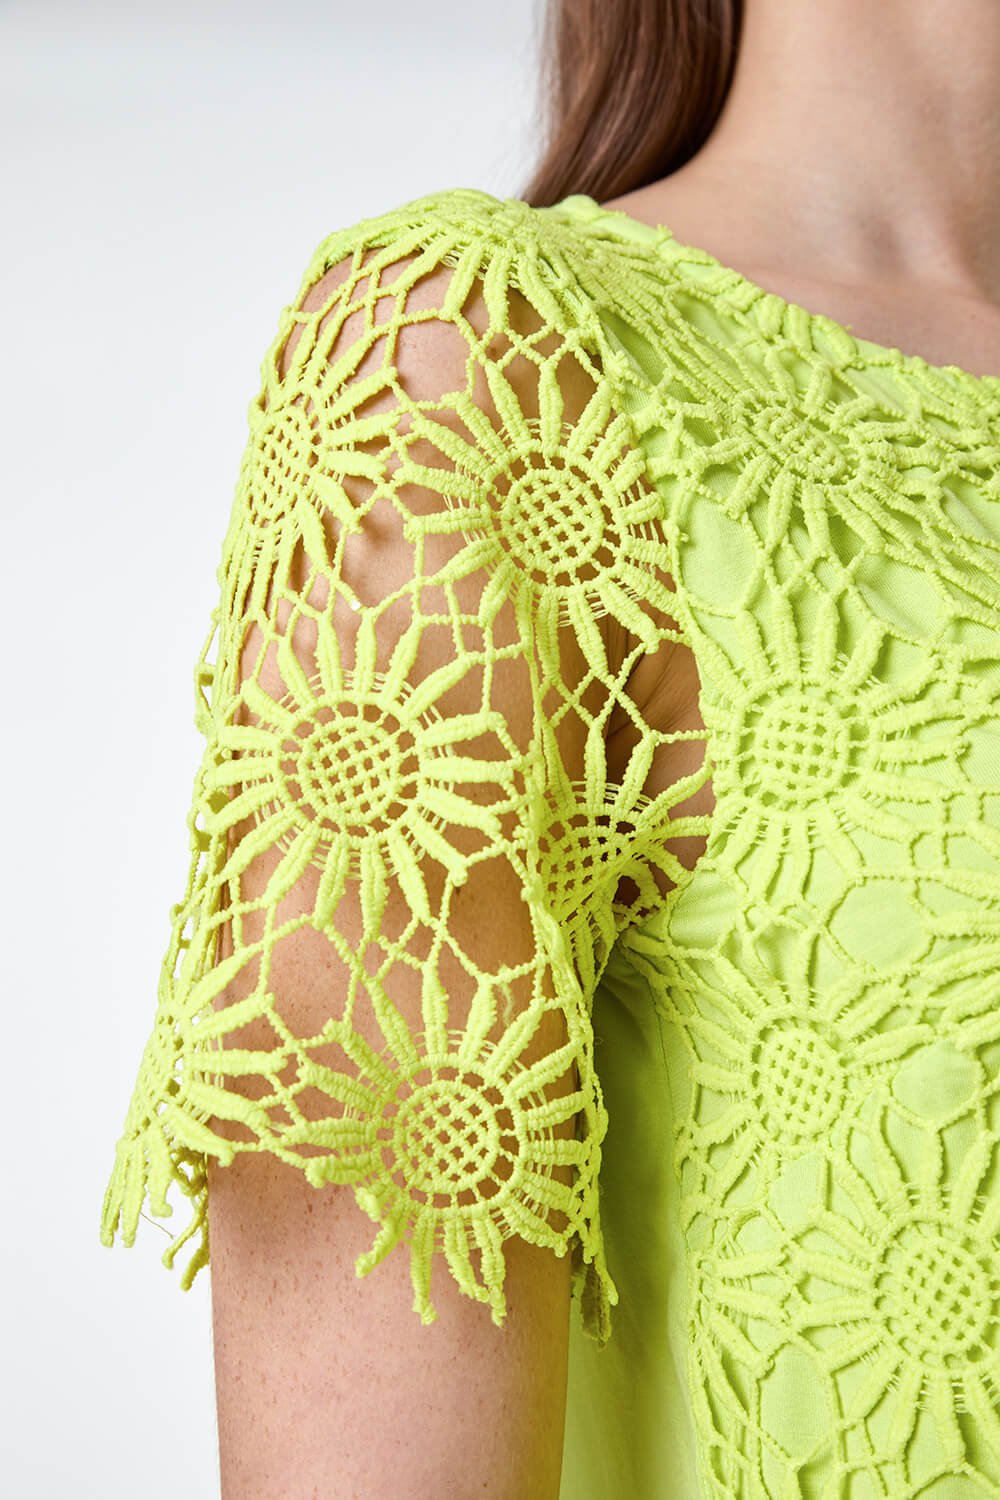 Yellow Floral Lace Stretch Jersey T-Shirt, Image 5 of 5